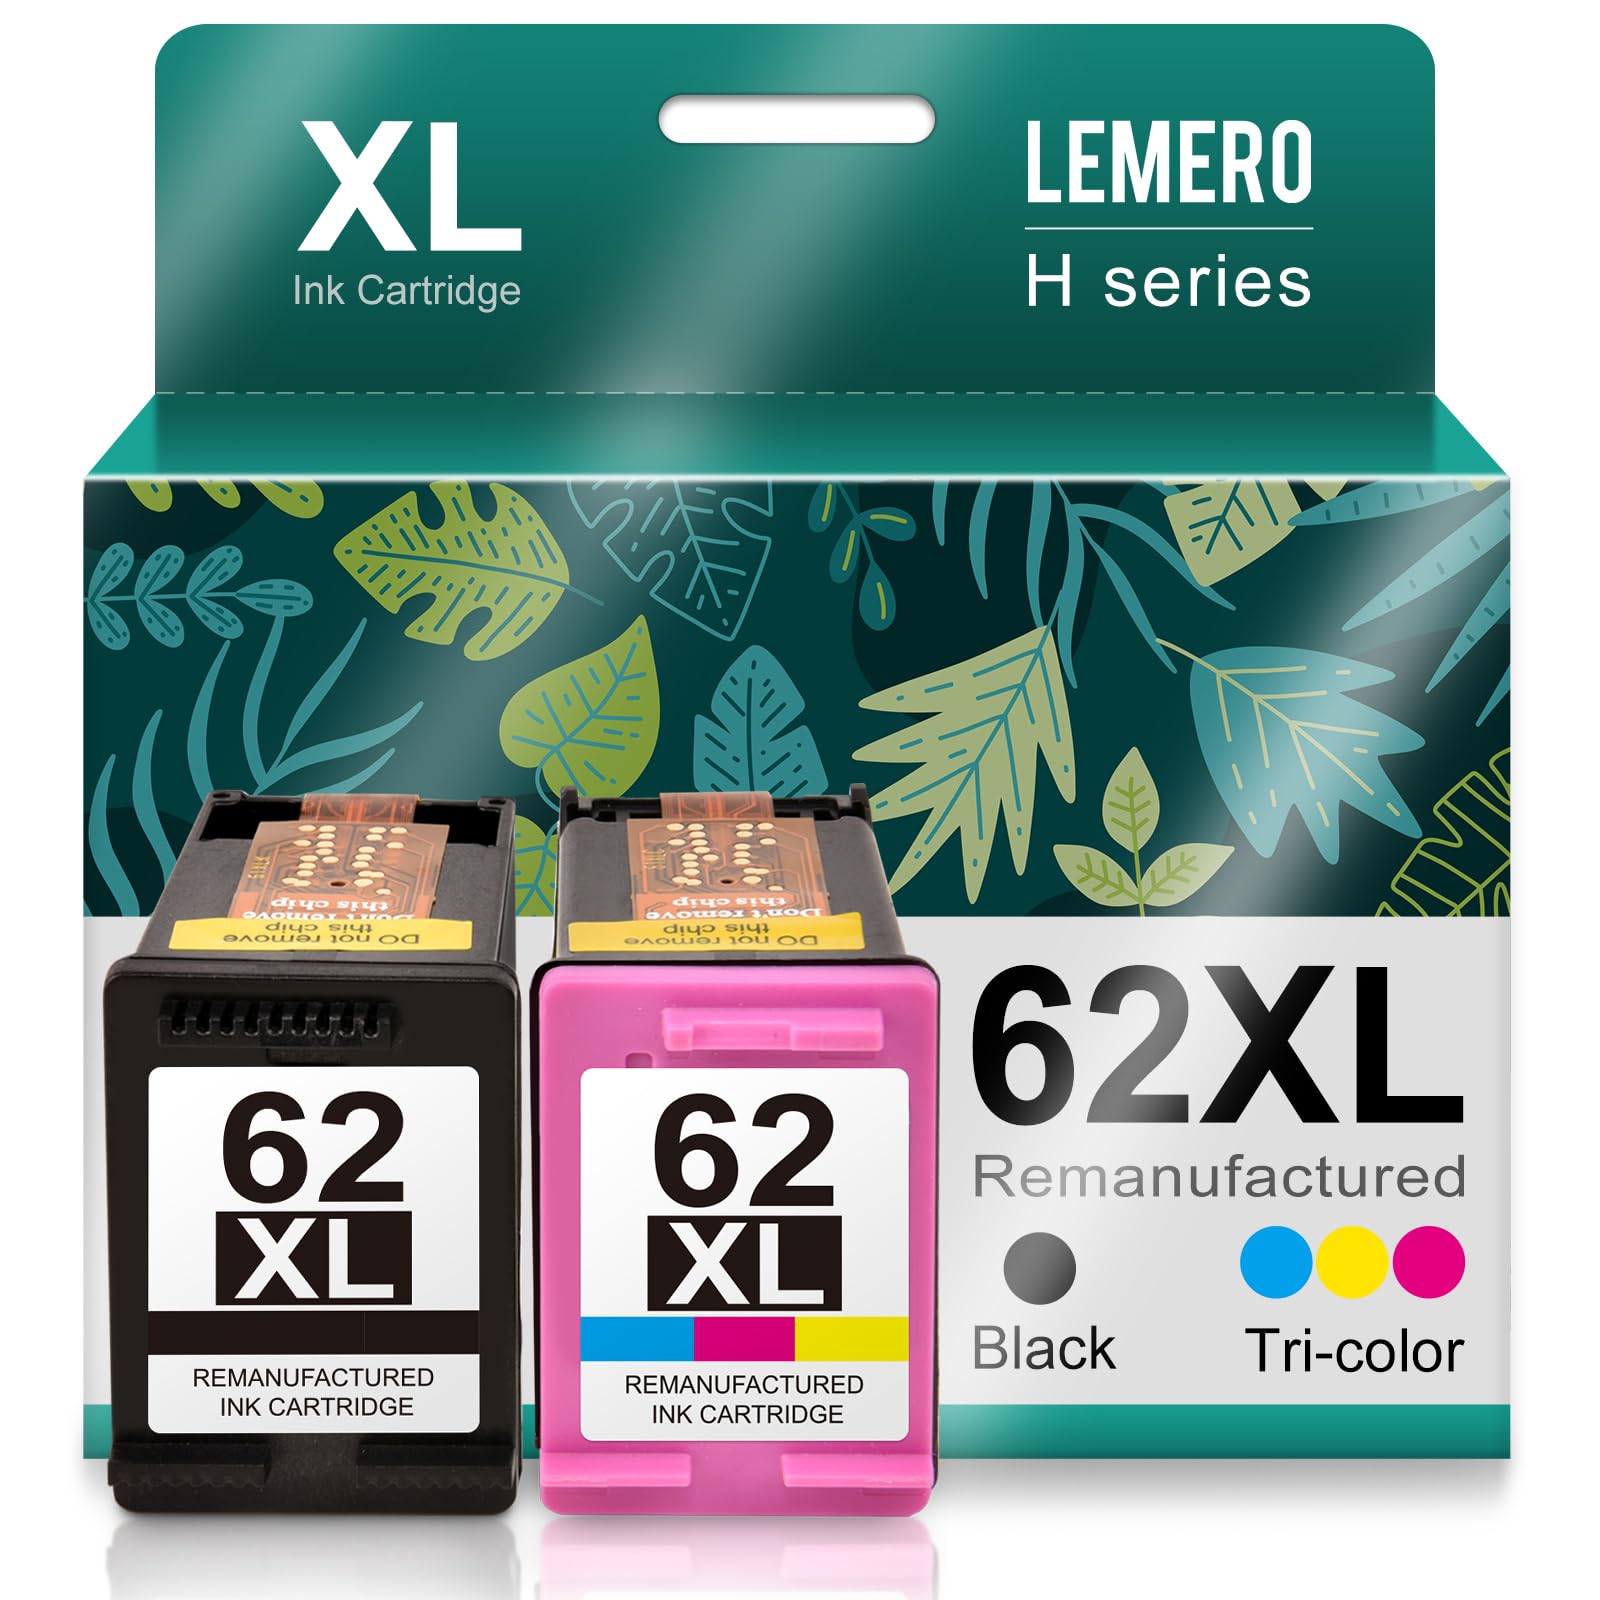 LEMERO HP 62XL Ink Cartridge Combo Pack with Black and Tri-Color Cartridges